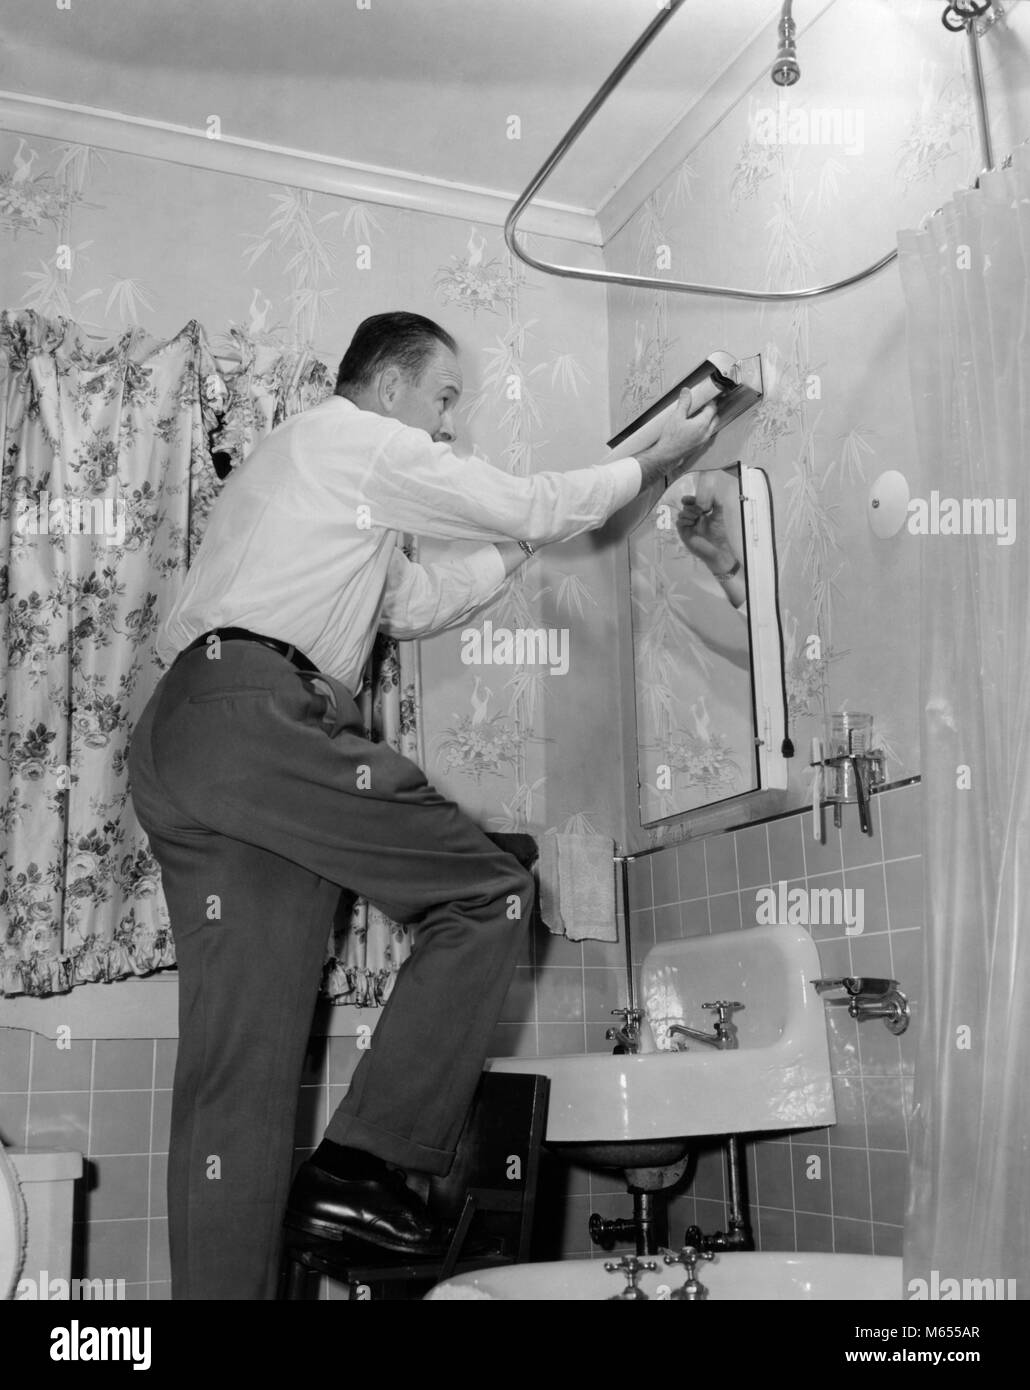 1950s MAN ON HOME REPAIR STEP STOOL IN BATHROOM REPLACING FLORESCENT LIGHTING FIXTURE ABOVE SINK - a1373 HAR001 HARS HOME IMPROVEMENT MALES MID-ADULT MID-ADULT MAN TASK AFTER WORK B&W BLACK AND WHITE CAUCASIAN ETHNICITY FIXTURE FLORESCENT HANDYMAN MISTER FIXIT OLD FASHIONED PERSONS REPLACEMENT REPLACING Stock Photo